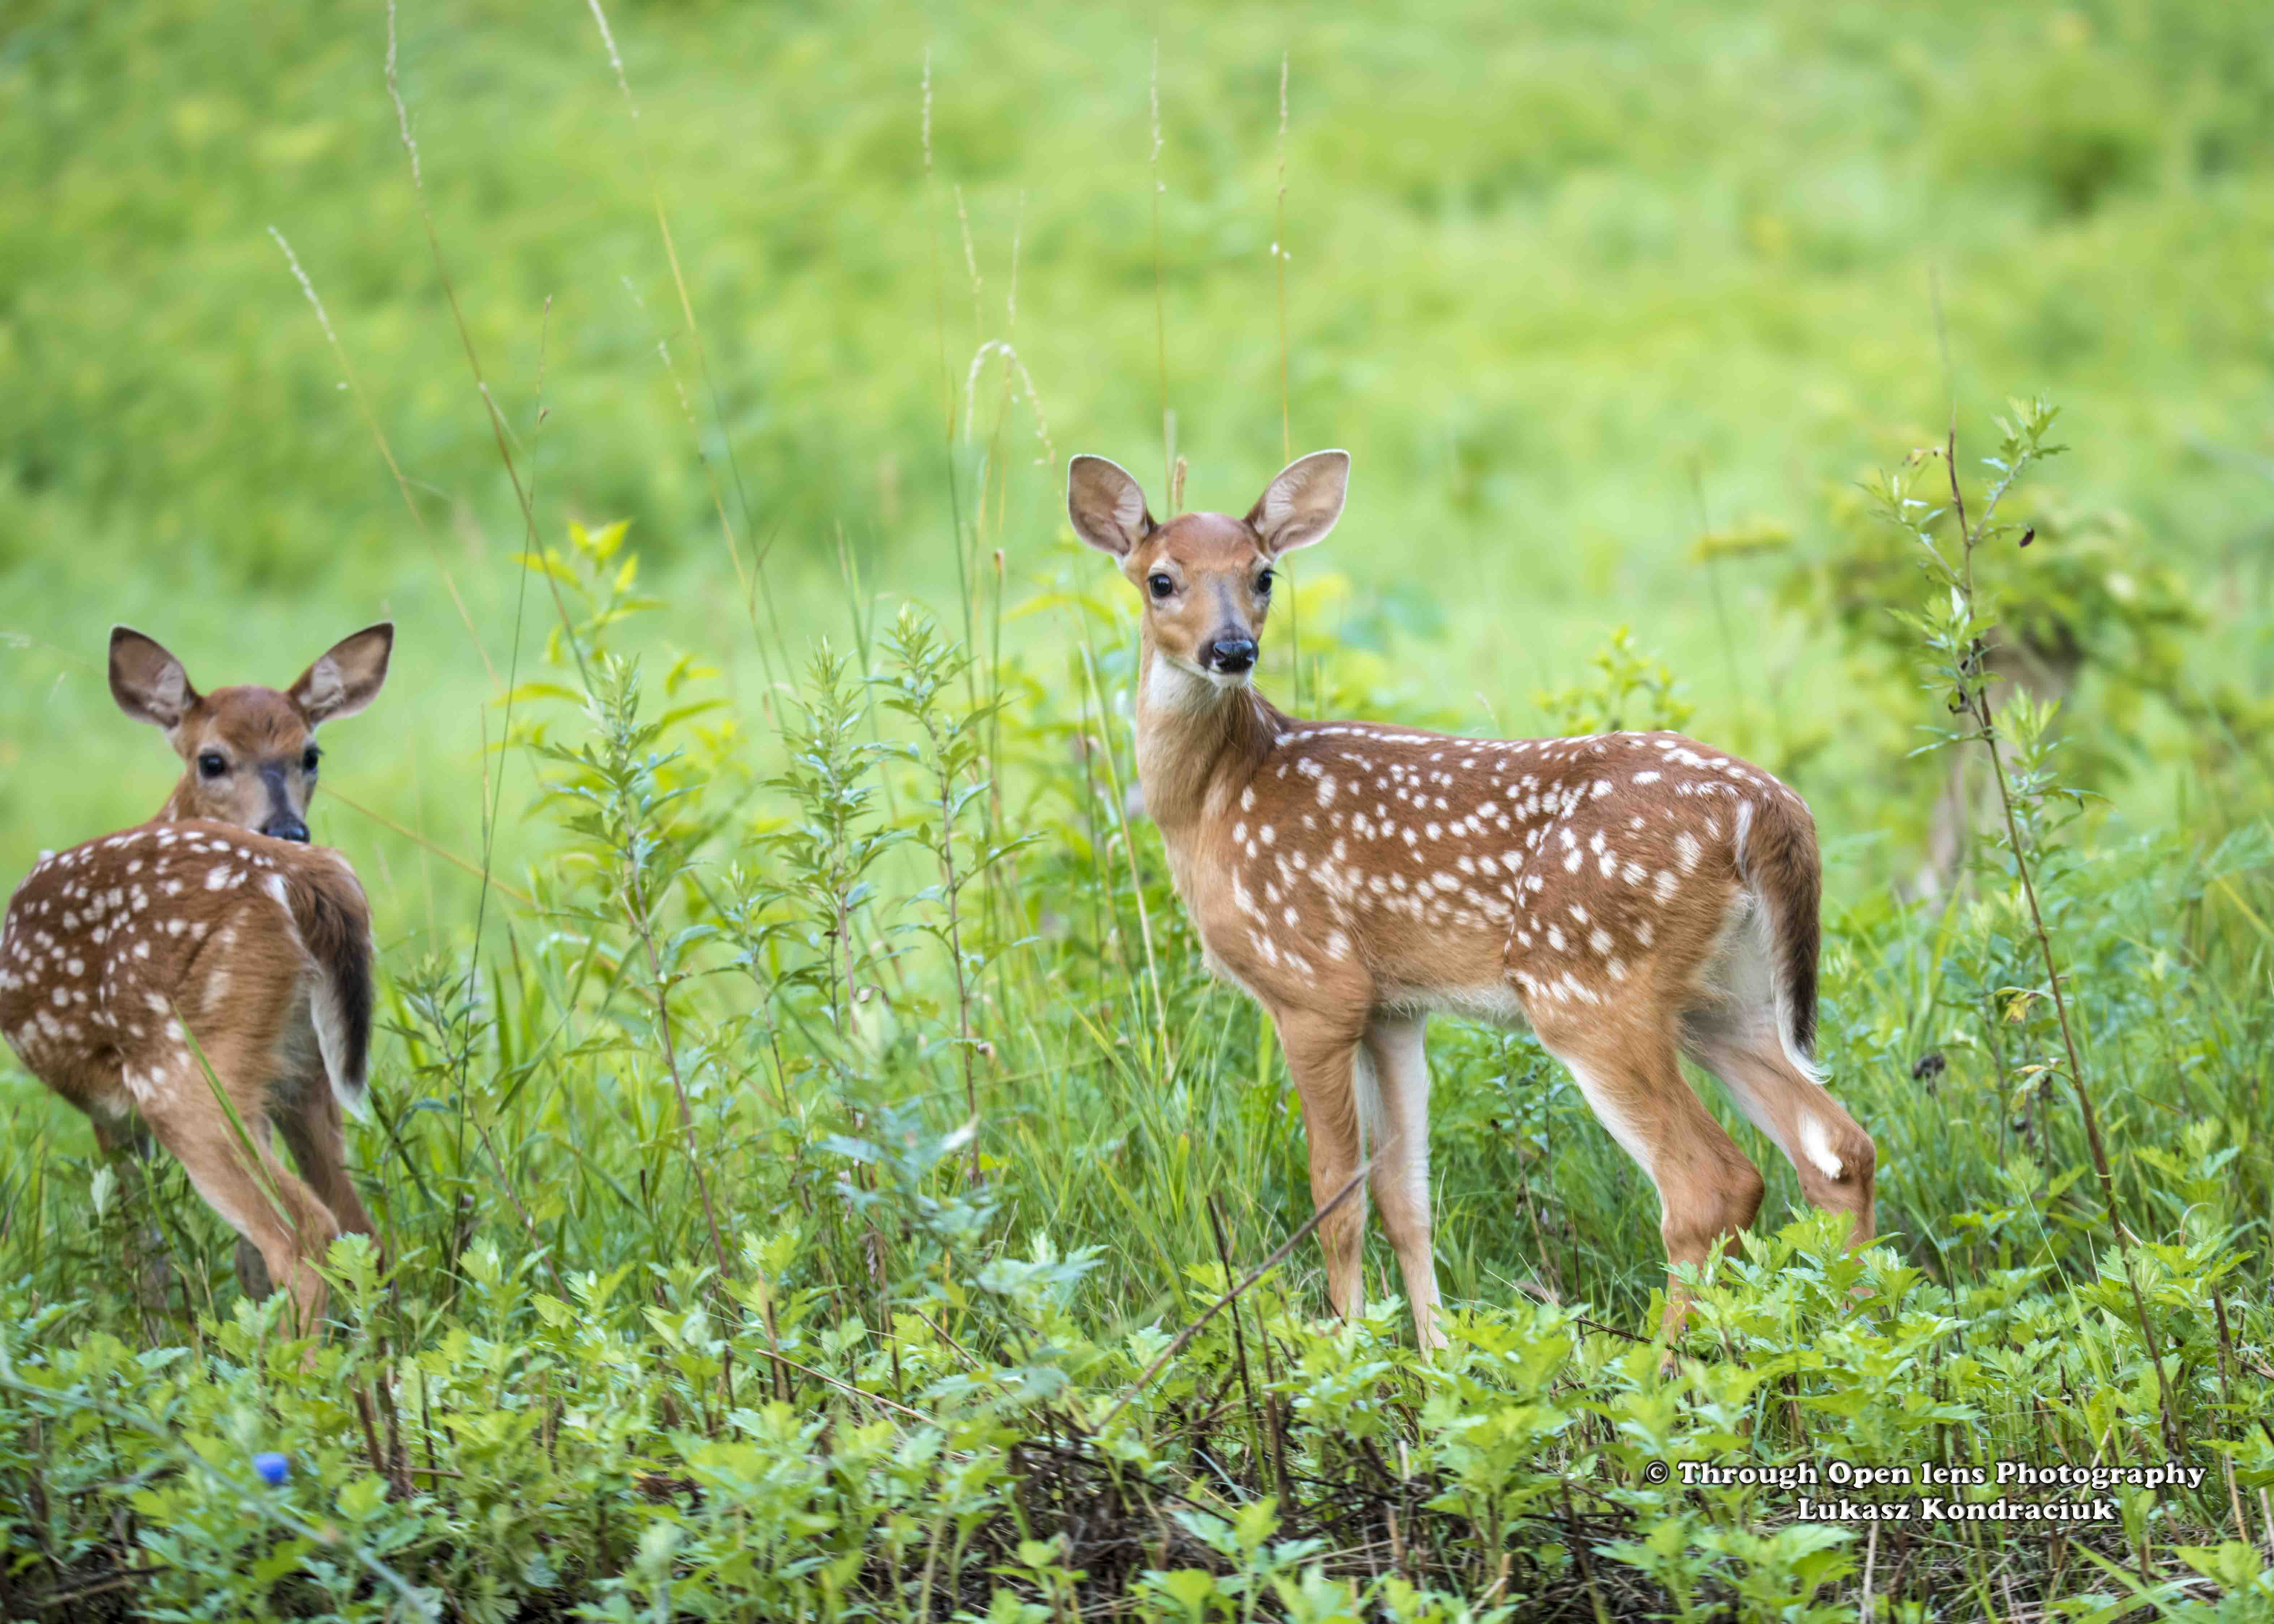 White-Tailed Deer Fawns – Through Open Lens